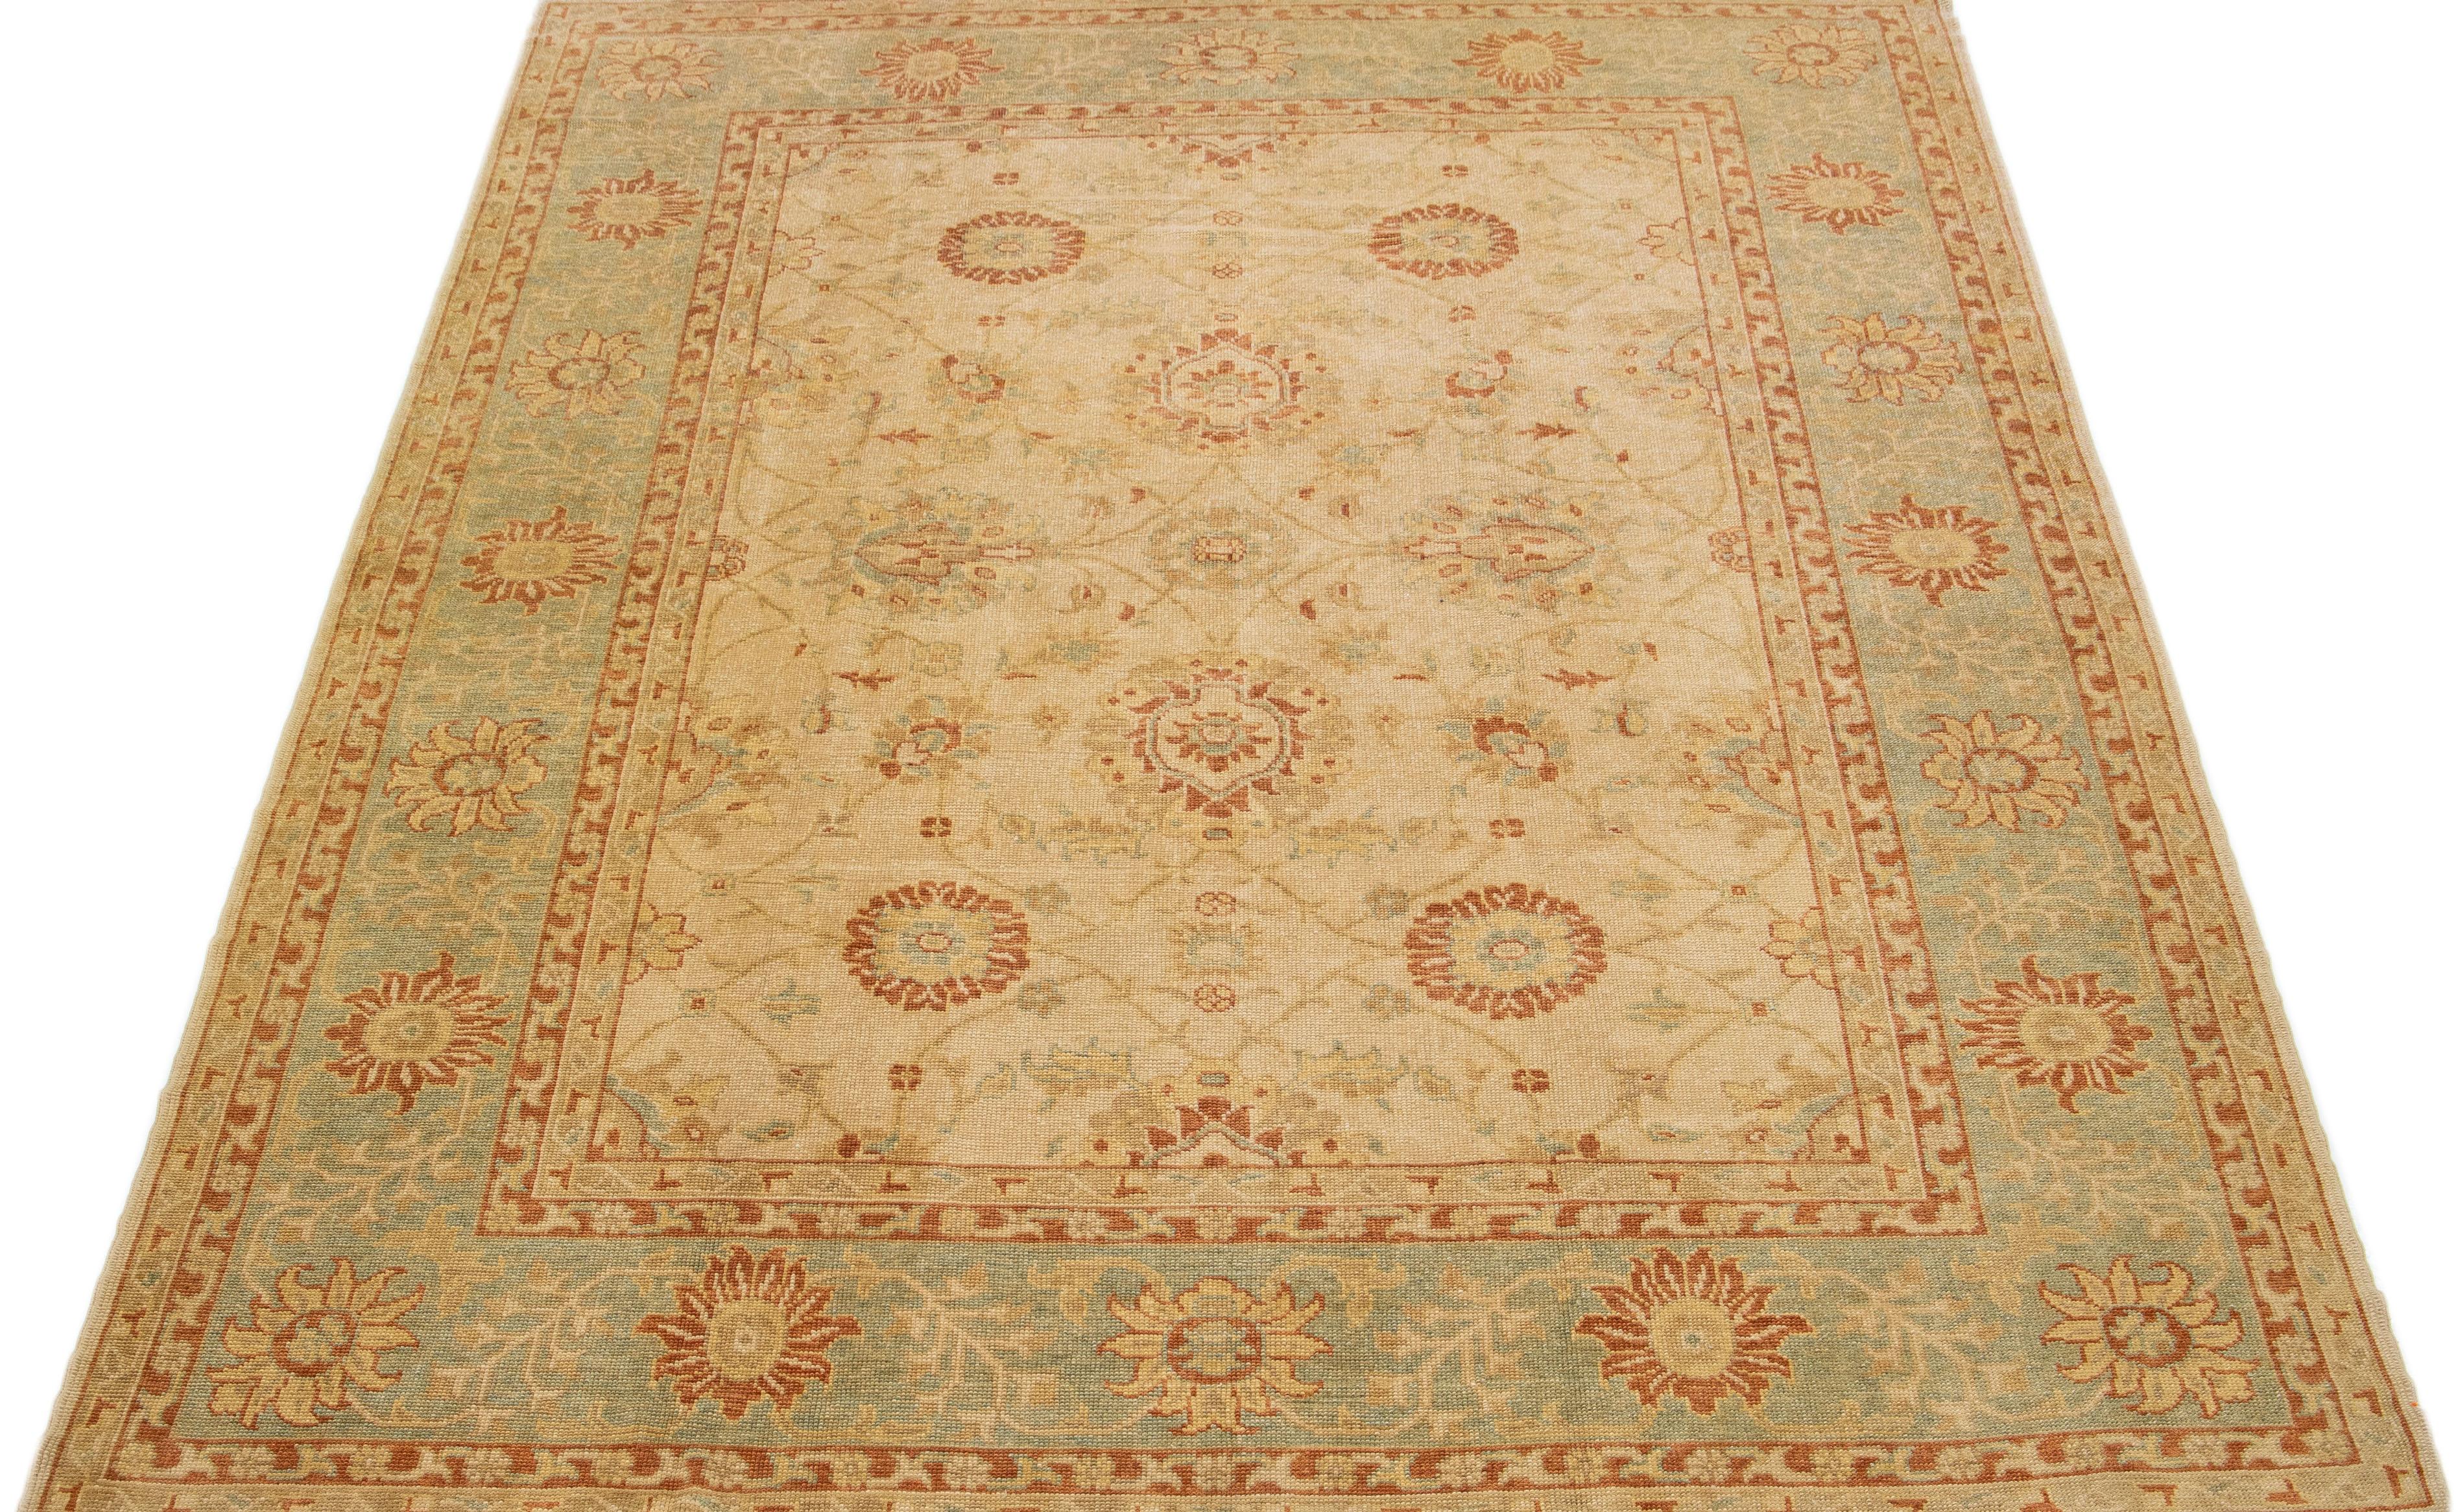 This modern Turkish wool rug boasts a tan field, beautifully framed with blue, rust, and goldenrod highlights in an intricate all-over floral pattern.

This rug measures: 9'5